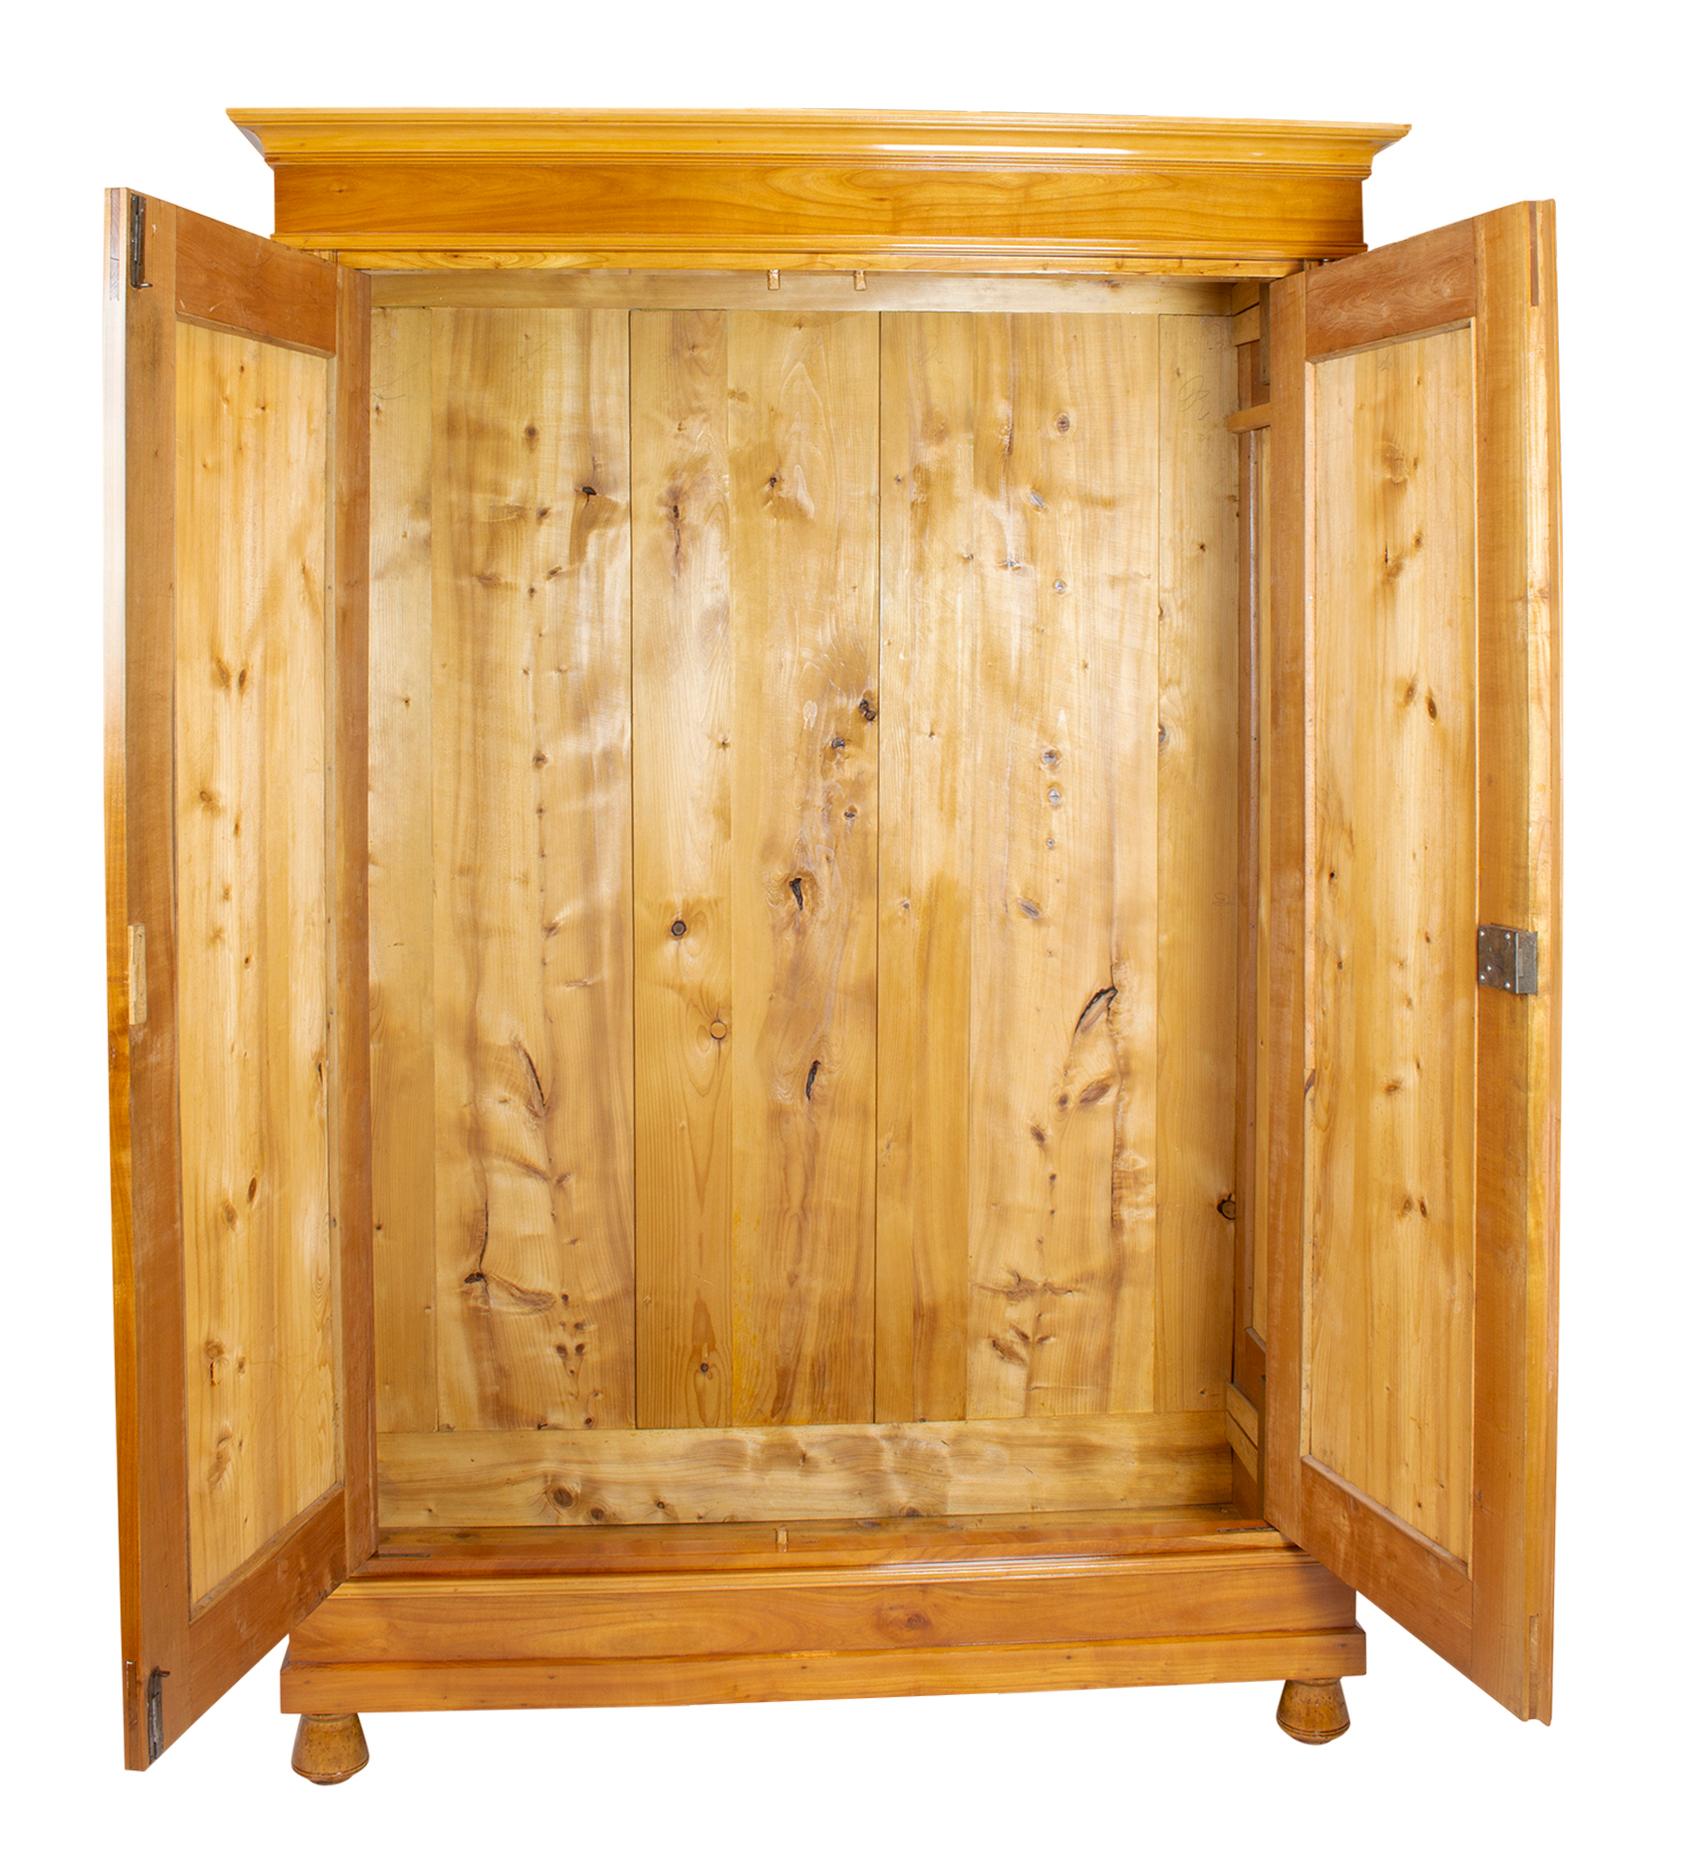 Beautiful wardrobe from the time of the Art Nouveau. Made of solid/veneer cherrywood. The panels of the doors and the sides are veneered, the rest is made of solid cherrywood. The wardrobe was lovingly restored by us. The wardrobe can be dismantled